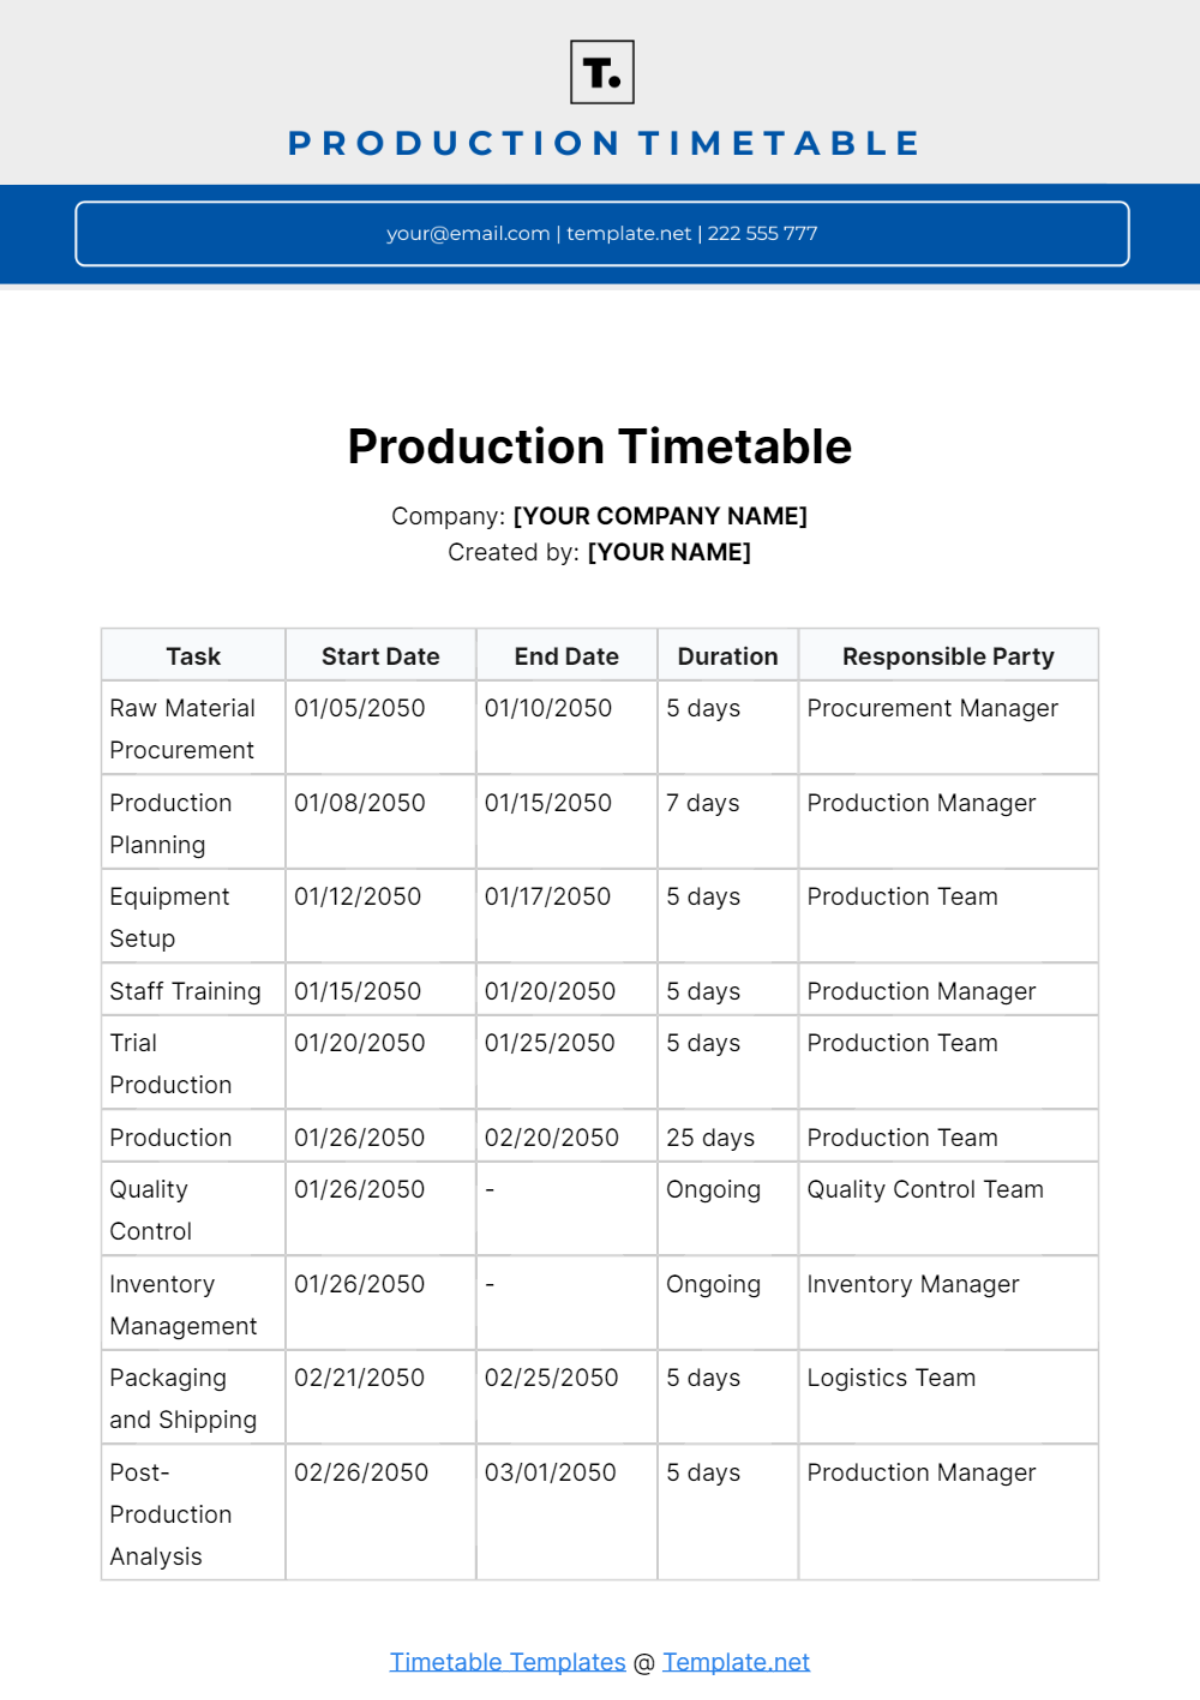 Production Timetable Template